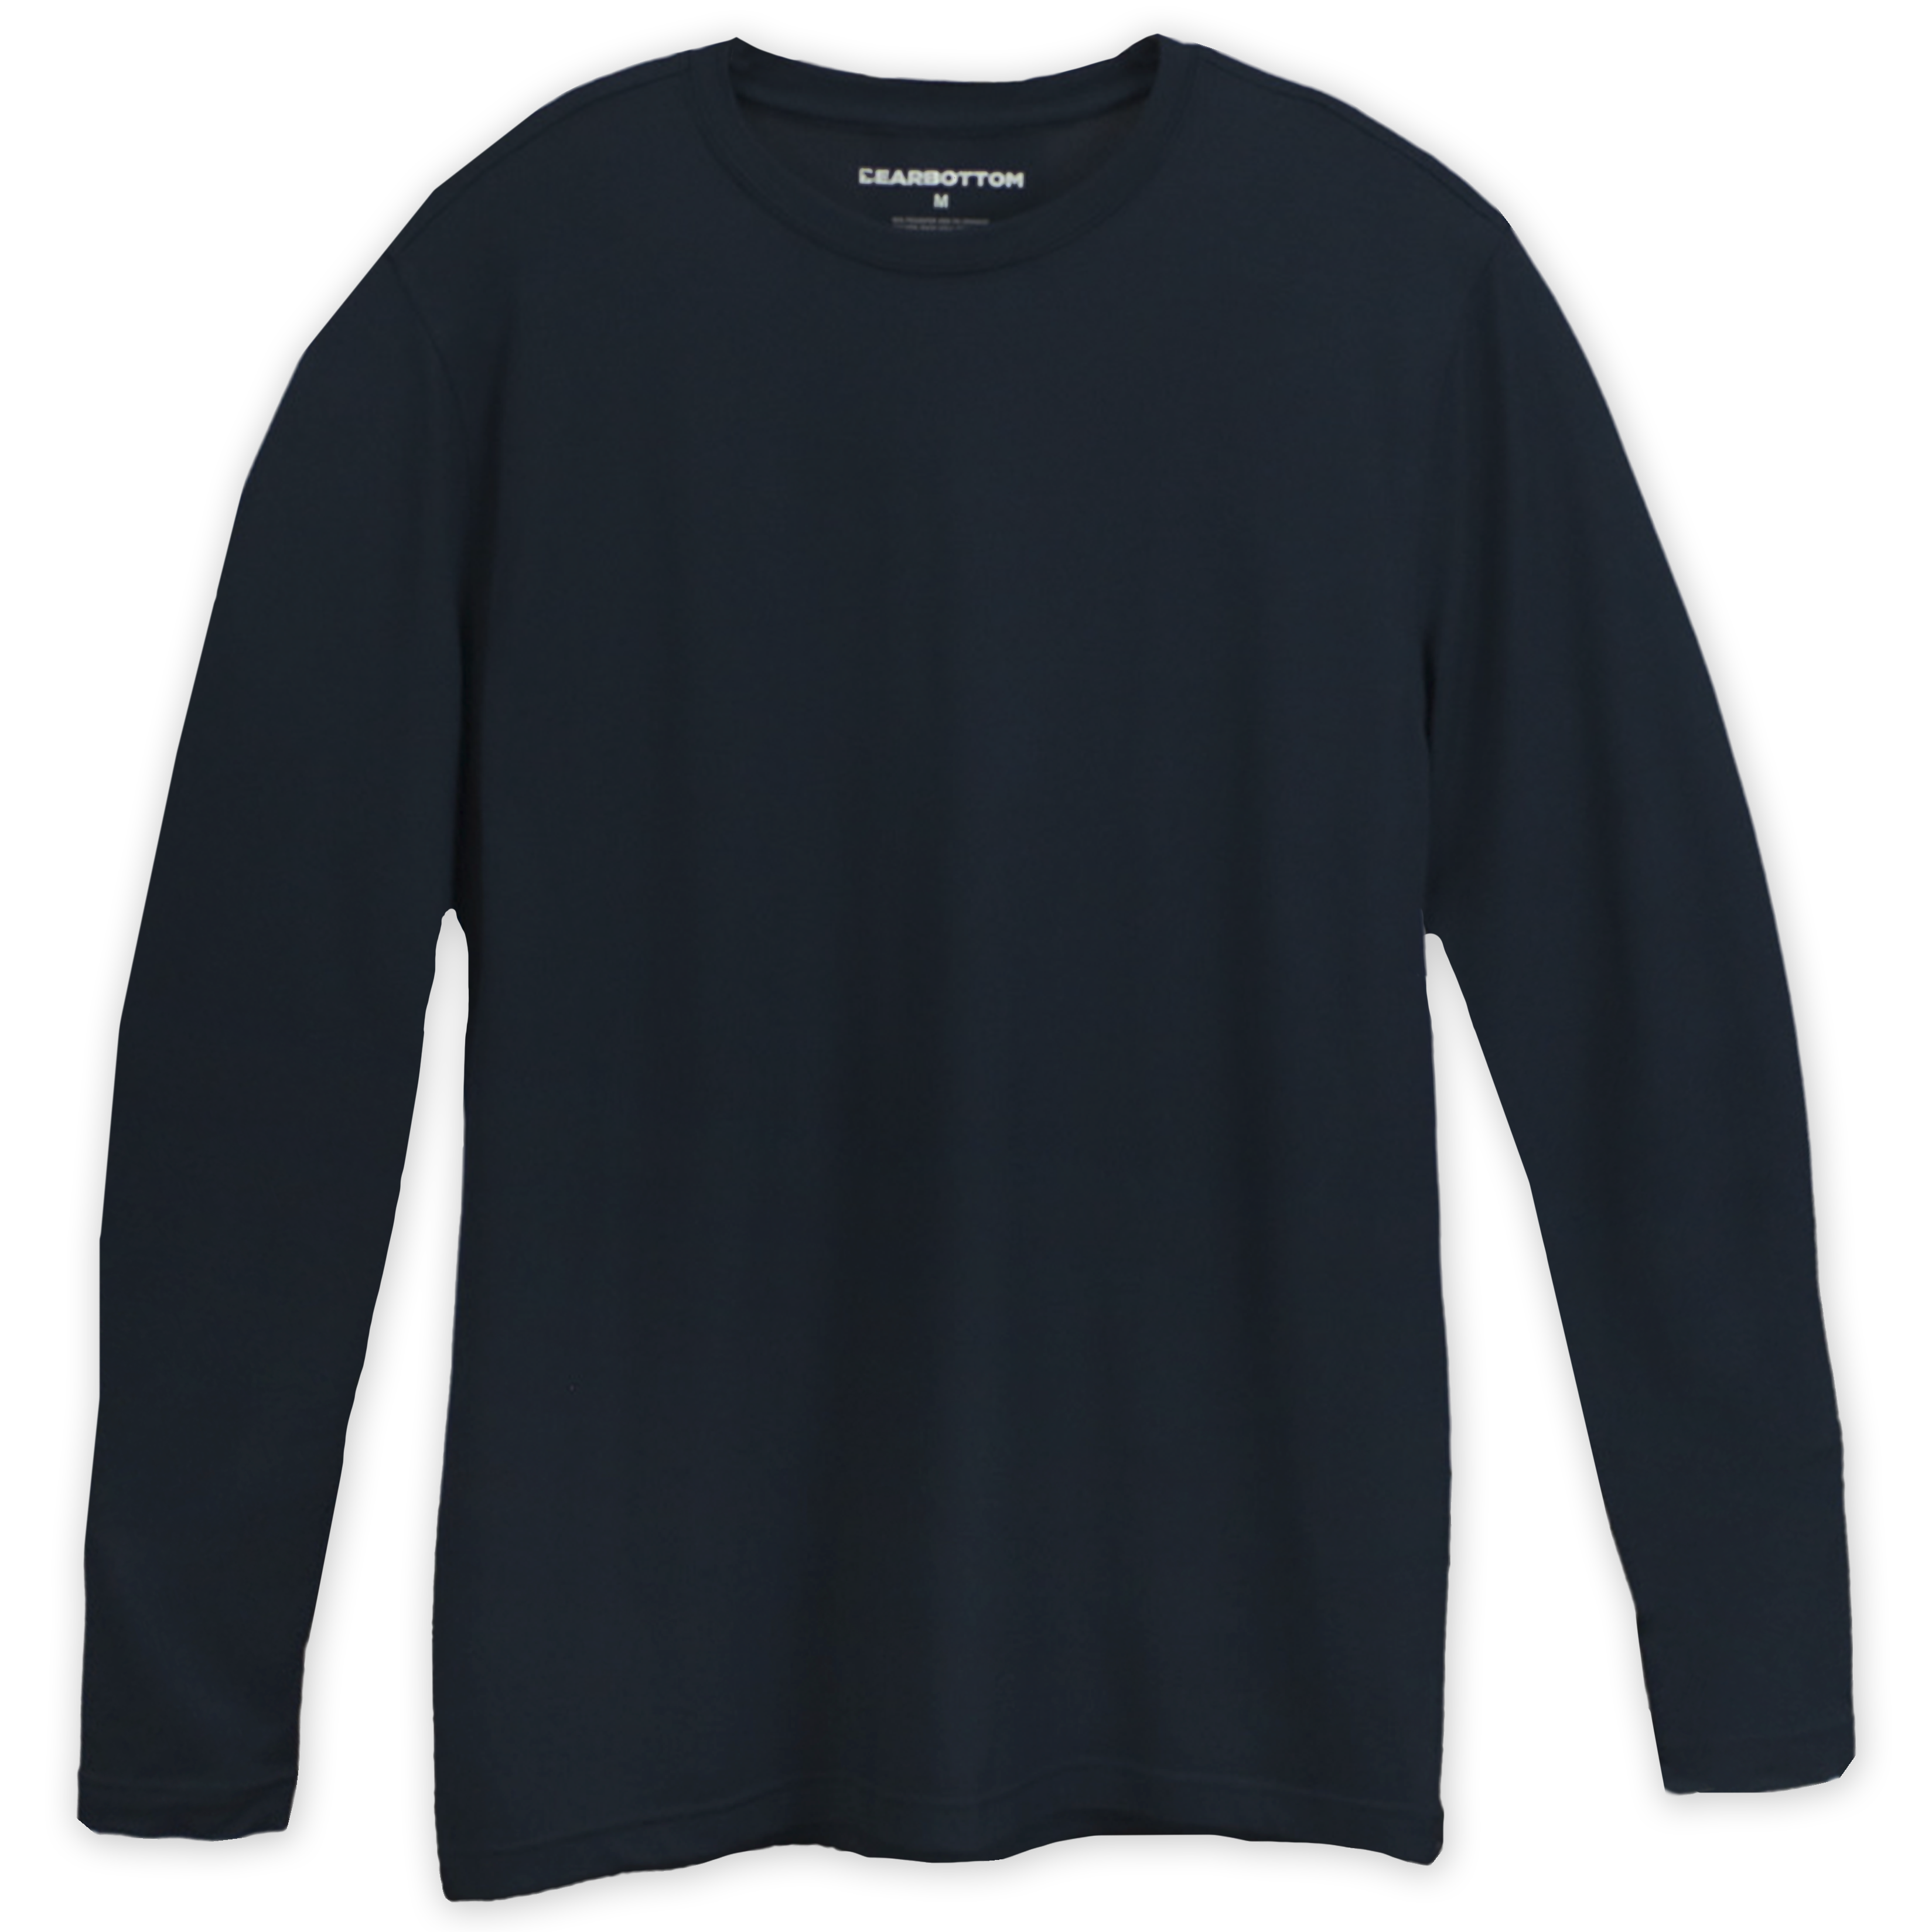 Long Sleeve Tech Tee Solid Navy front with crewneck